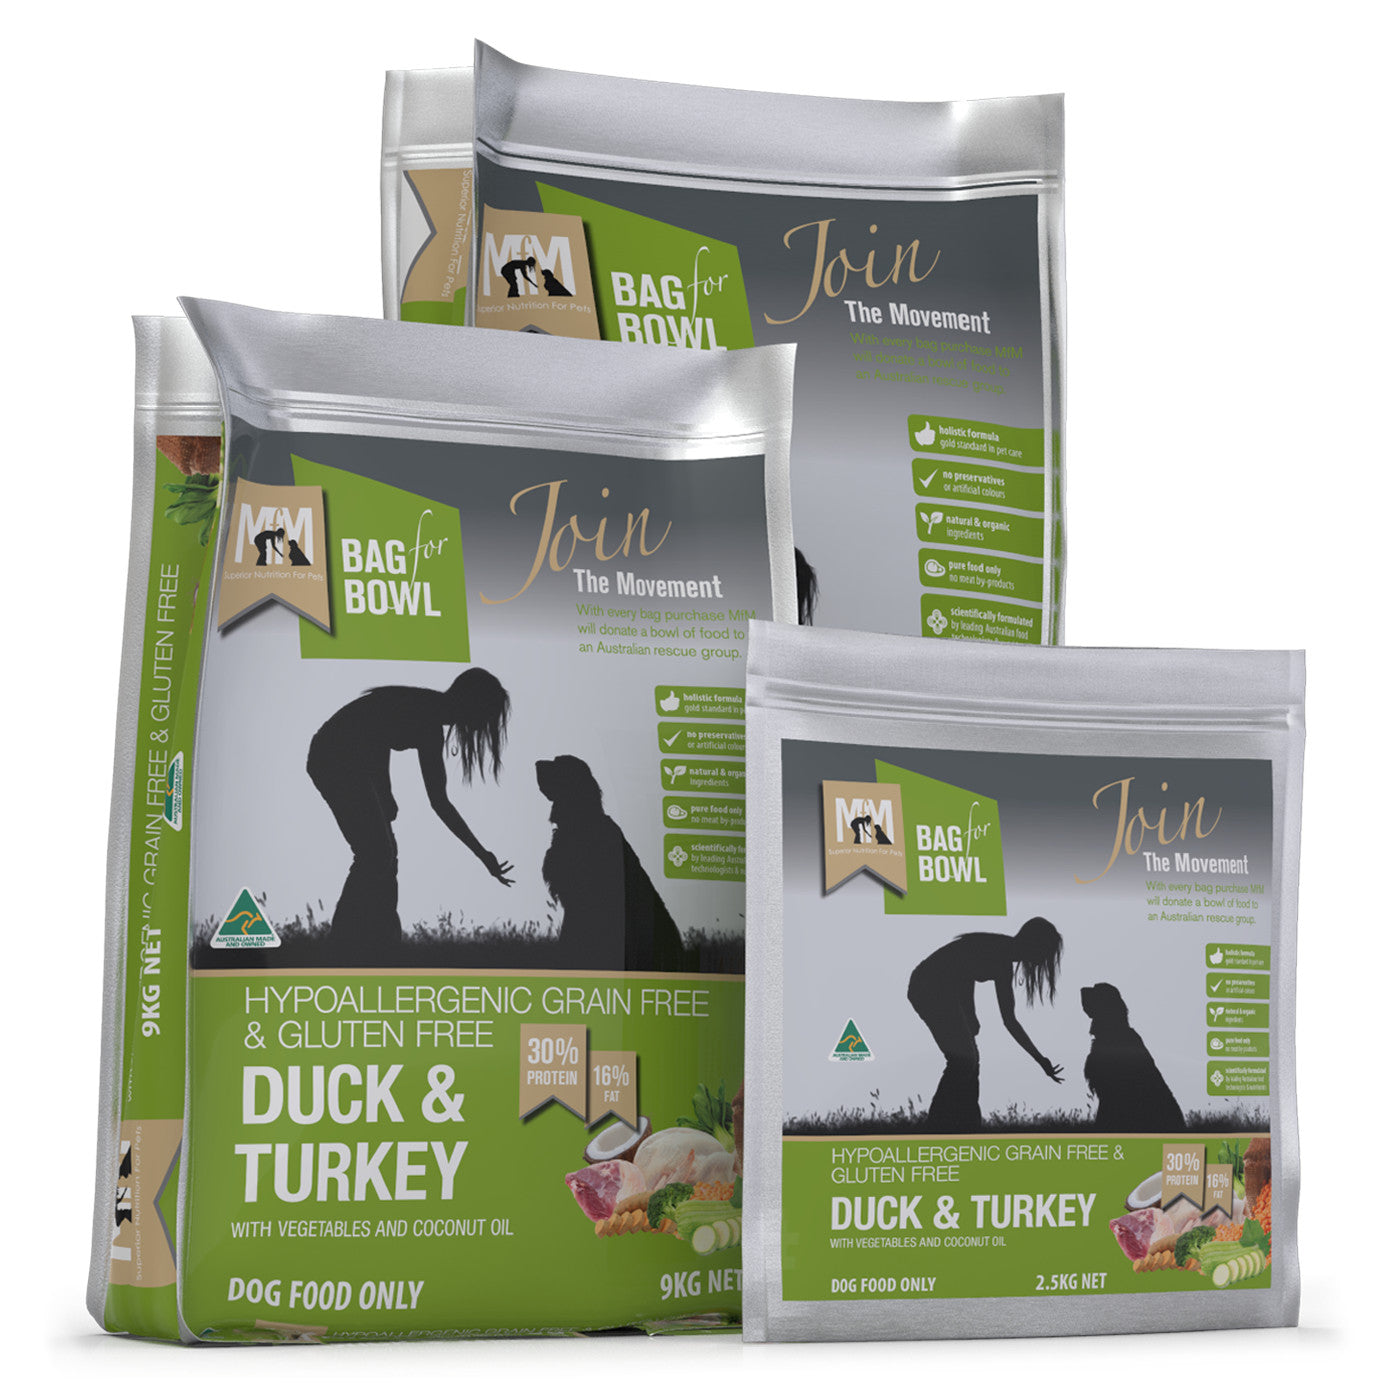 Meals for Mutts Grain Free Duck & Turkey Dog Food.